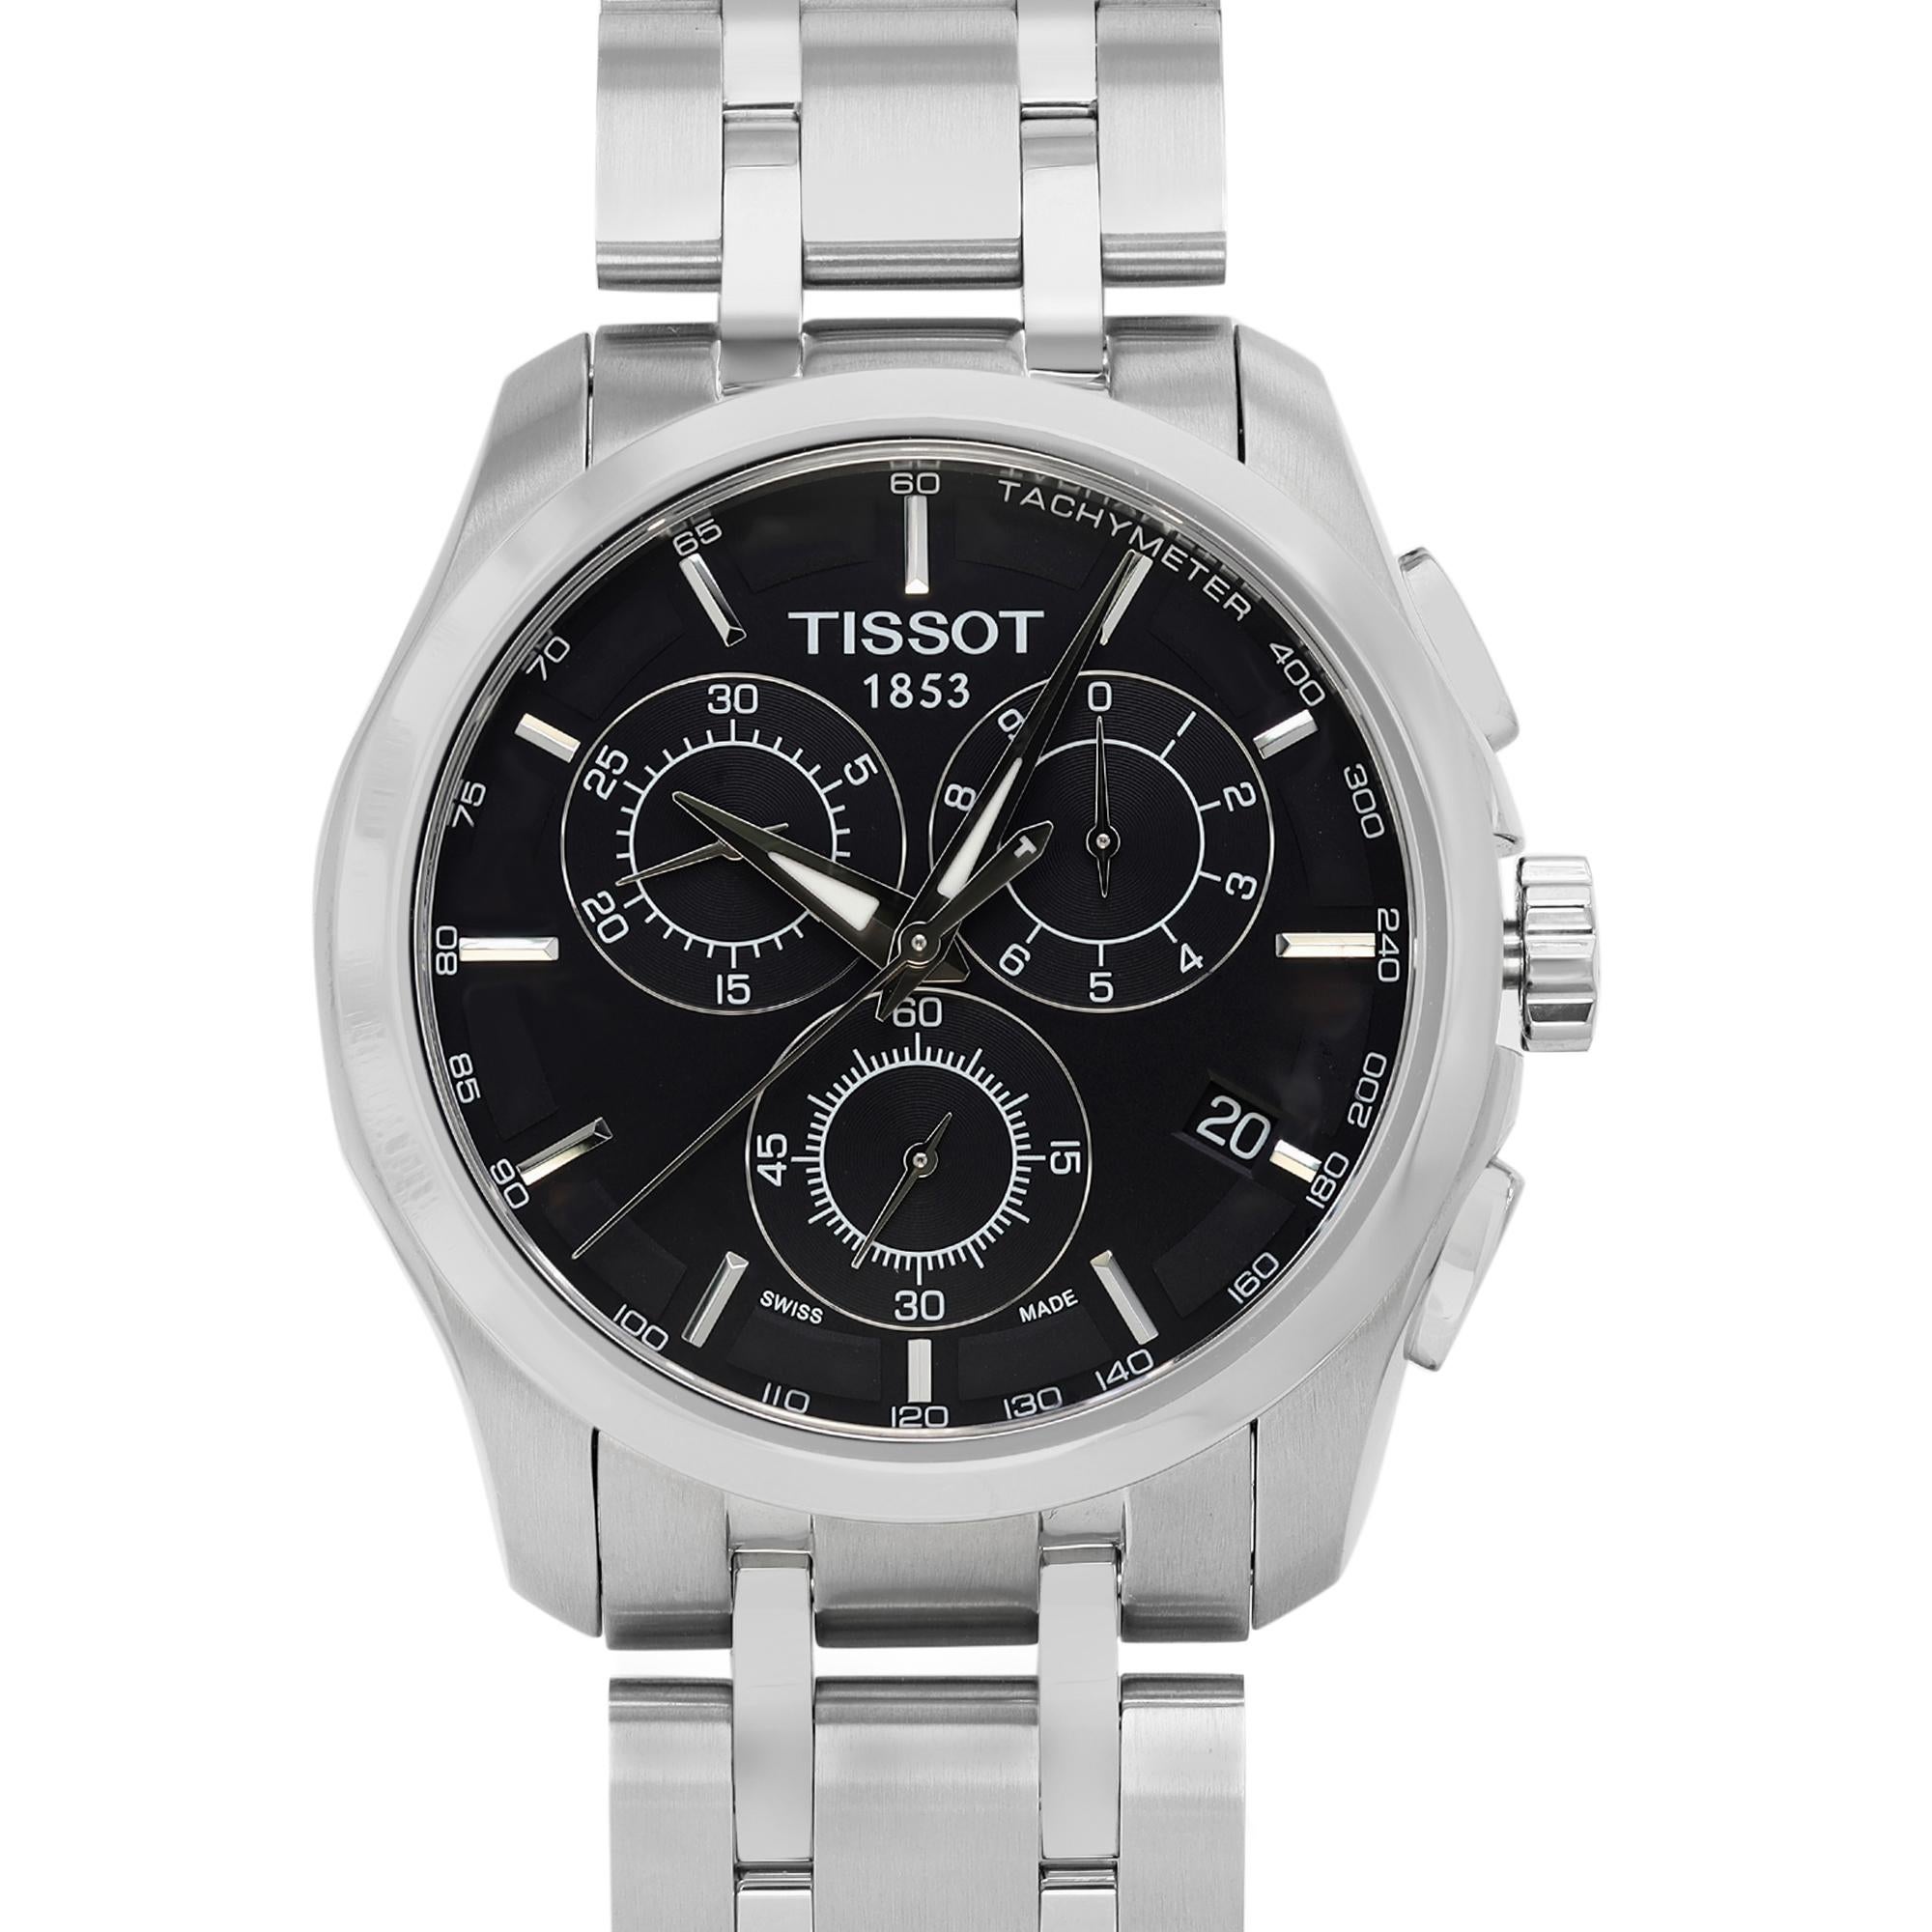 Unworn Tissot Couturier Men's Watch T035.617.11.051.00. Quartz (Battery) Movement powers this Beautiful Timepiece. Features: Round Stainless Steel Case & Bracelet, Fixed Stainless Steel Bezel, Black Dial with Luminous Silver-Tone Hands and Index